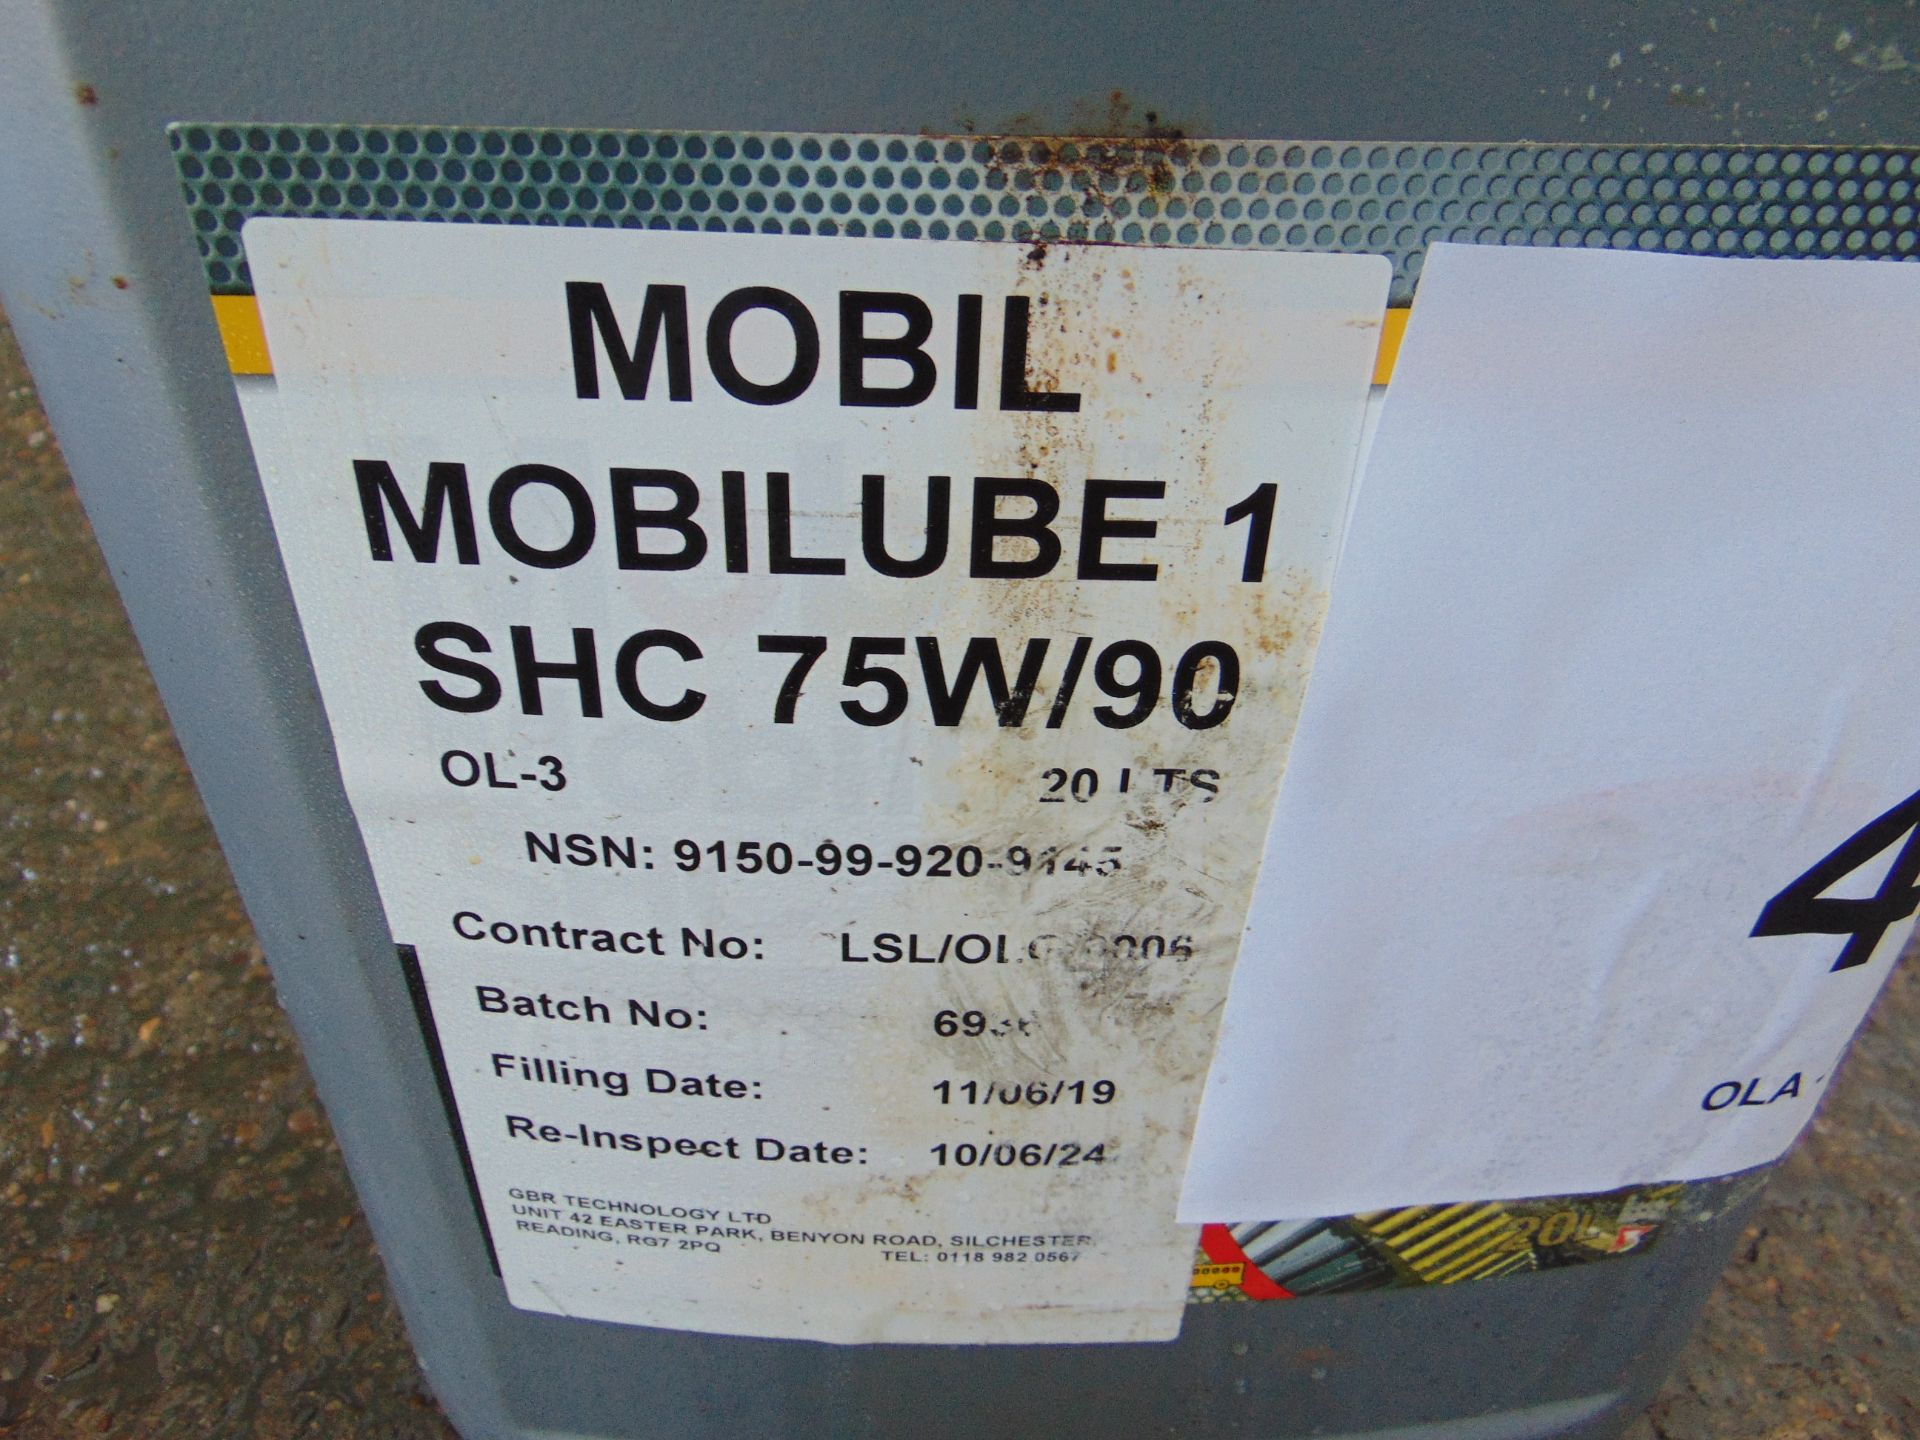 1 x Unissued 20L Drum of Mobil Mobilube 1 SHC 75W-90 Fully Synthetic High Performance Gear Box Oil - Image 2 of 2